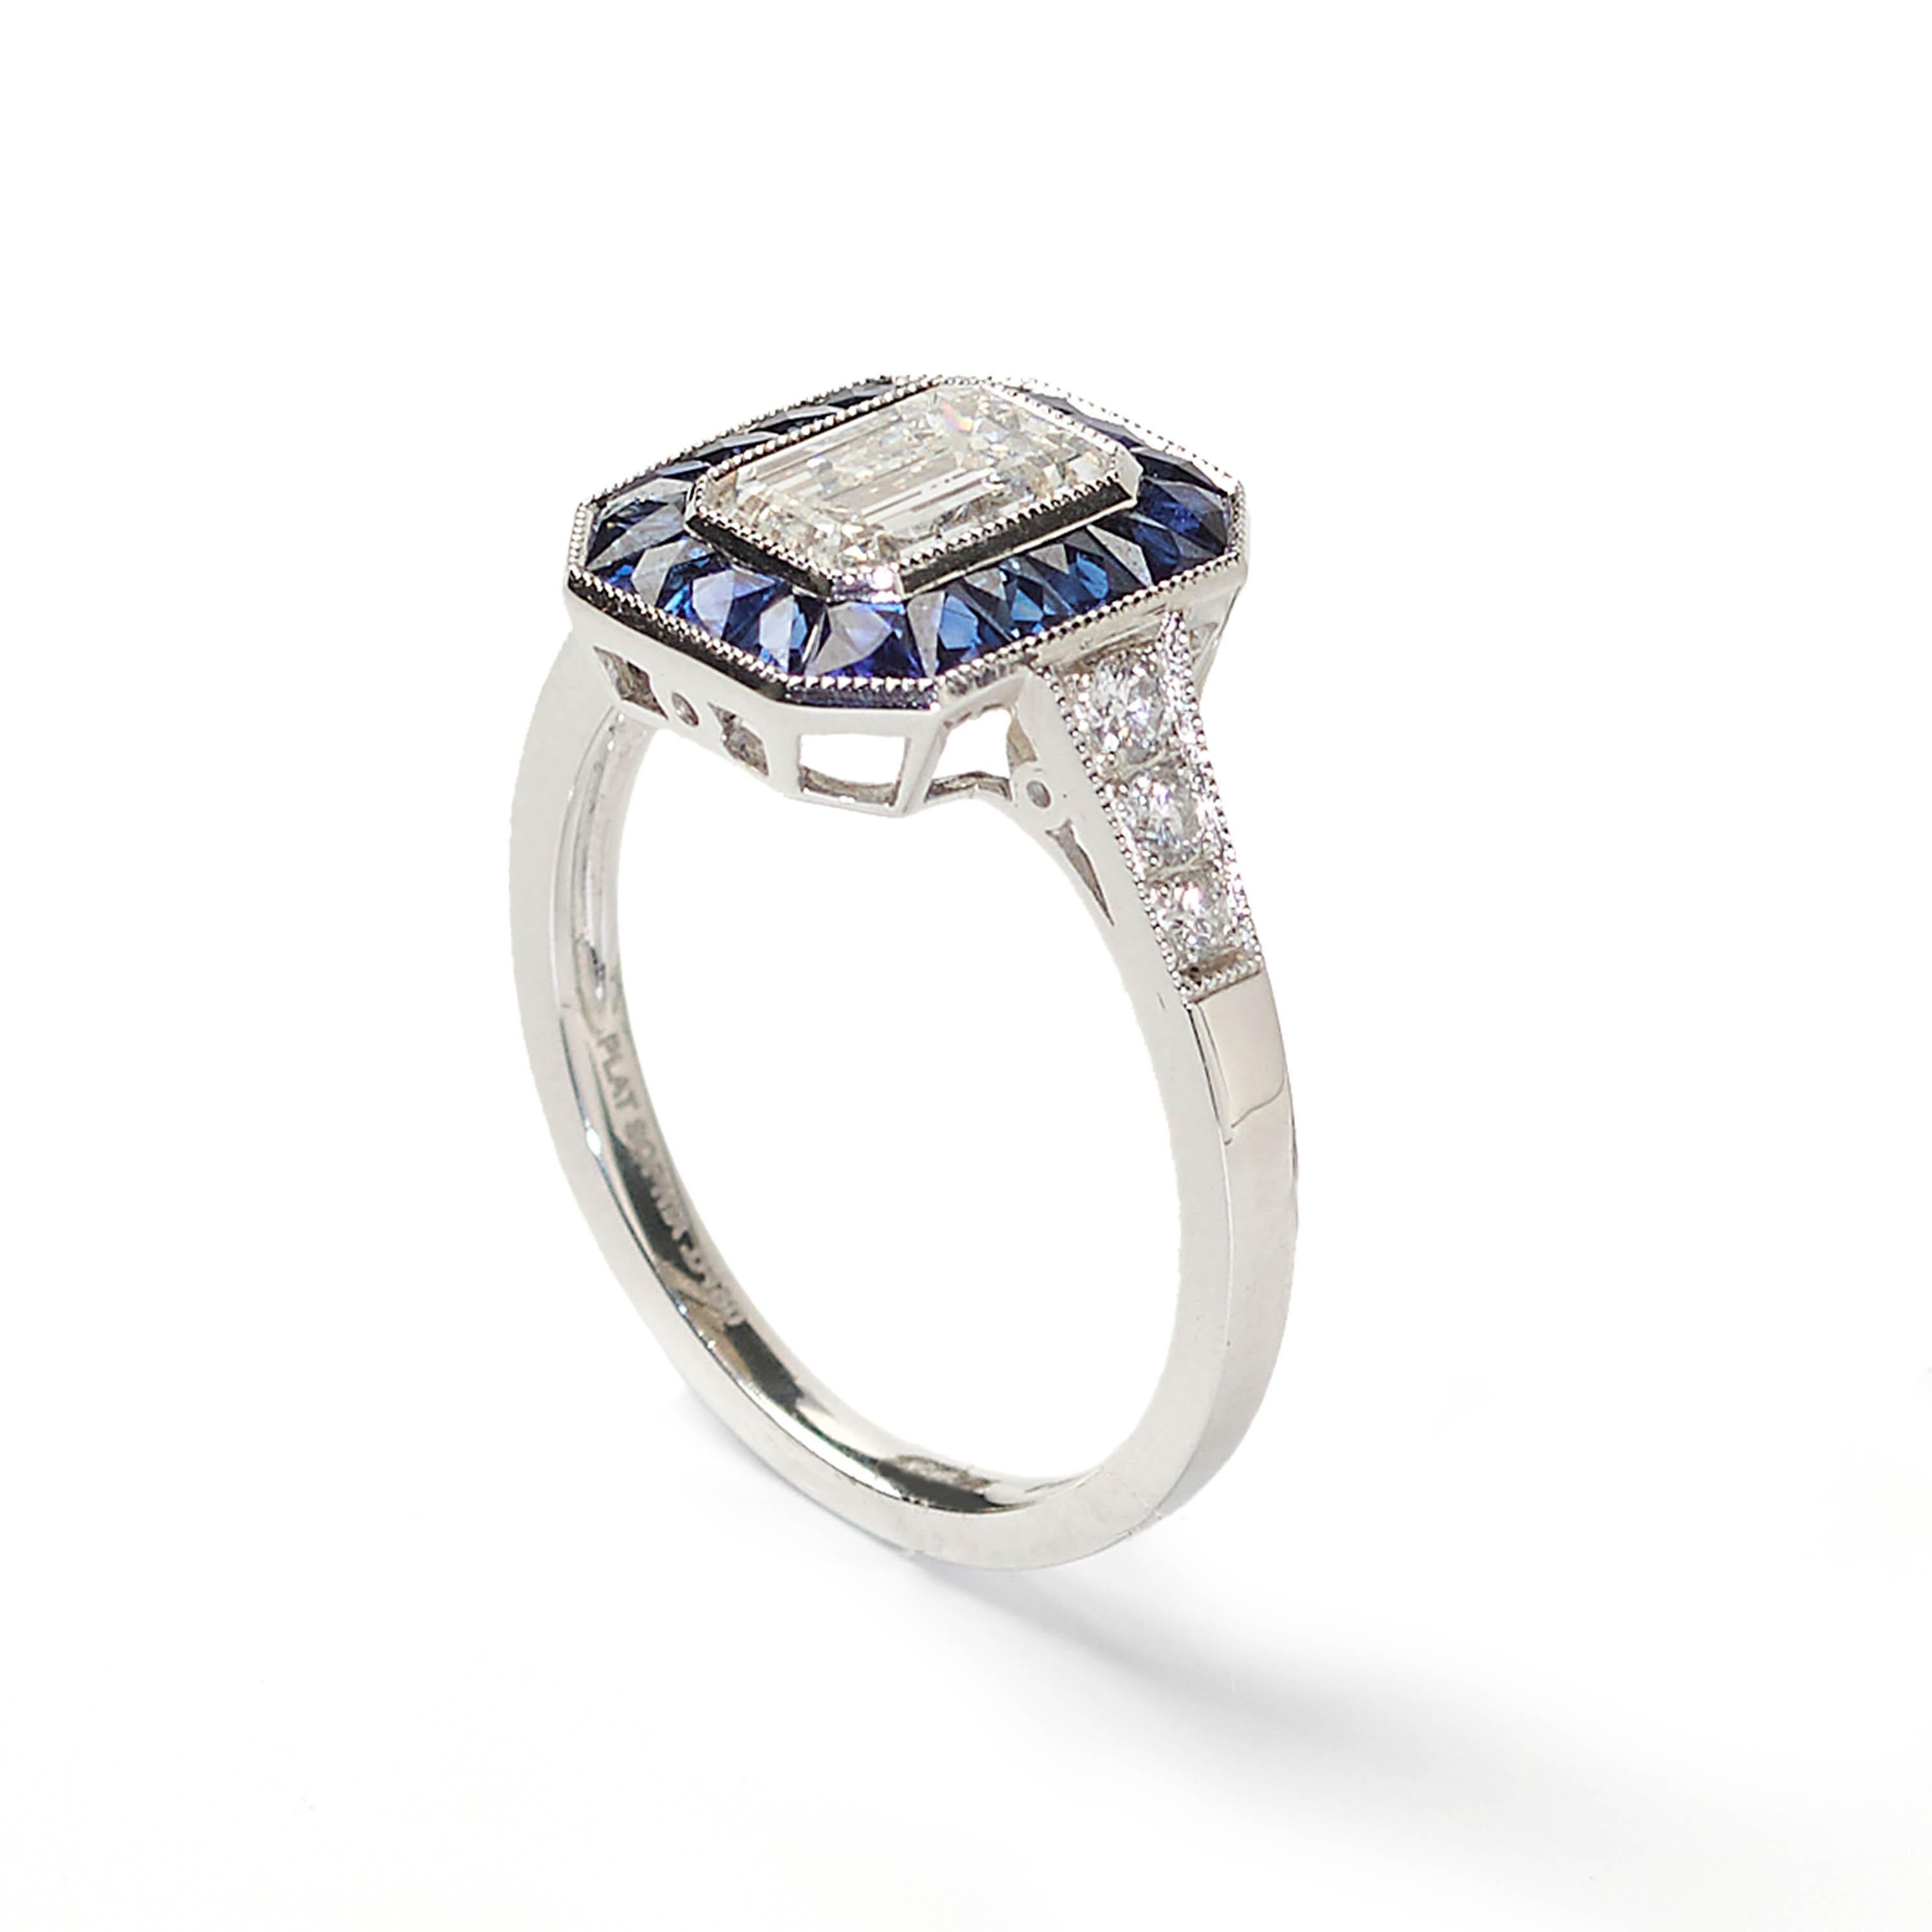 A modern, octagonal-shaped cluster ring set with a central emerald-cut diamond, weighing 1.01 carats, surrounded by a border of sapphires weighing a total of 0.78 carats, with diamonds set to the shoulders weighing a total of 0.16 carats, all